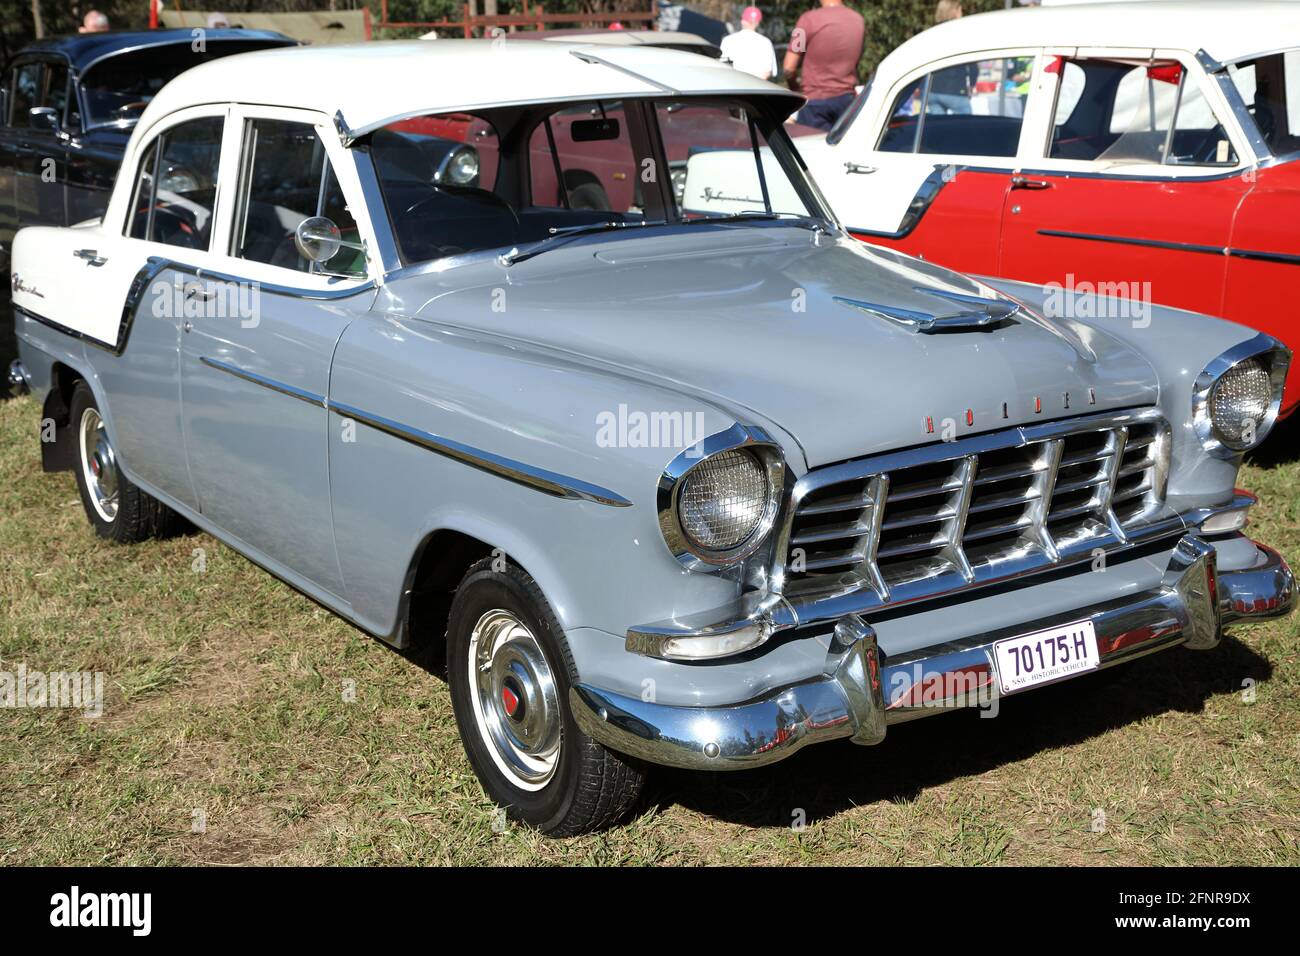 East Kurrajong, NSW, Australia - 16 May 2021. A vintage Holden FC automobile made in Australia between 1958 and 1960. Stock Photo